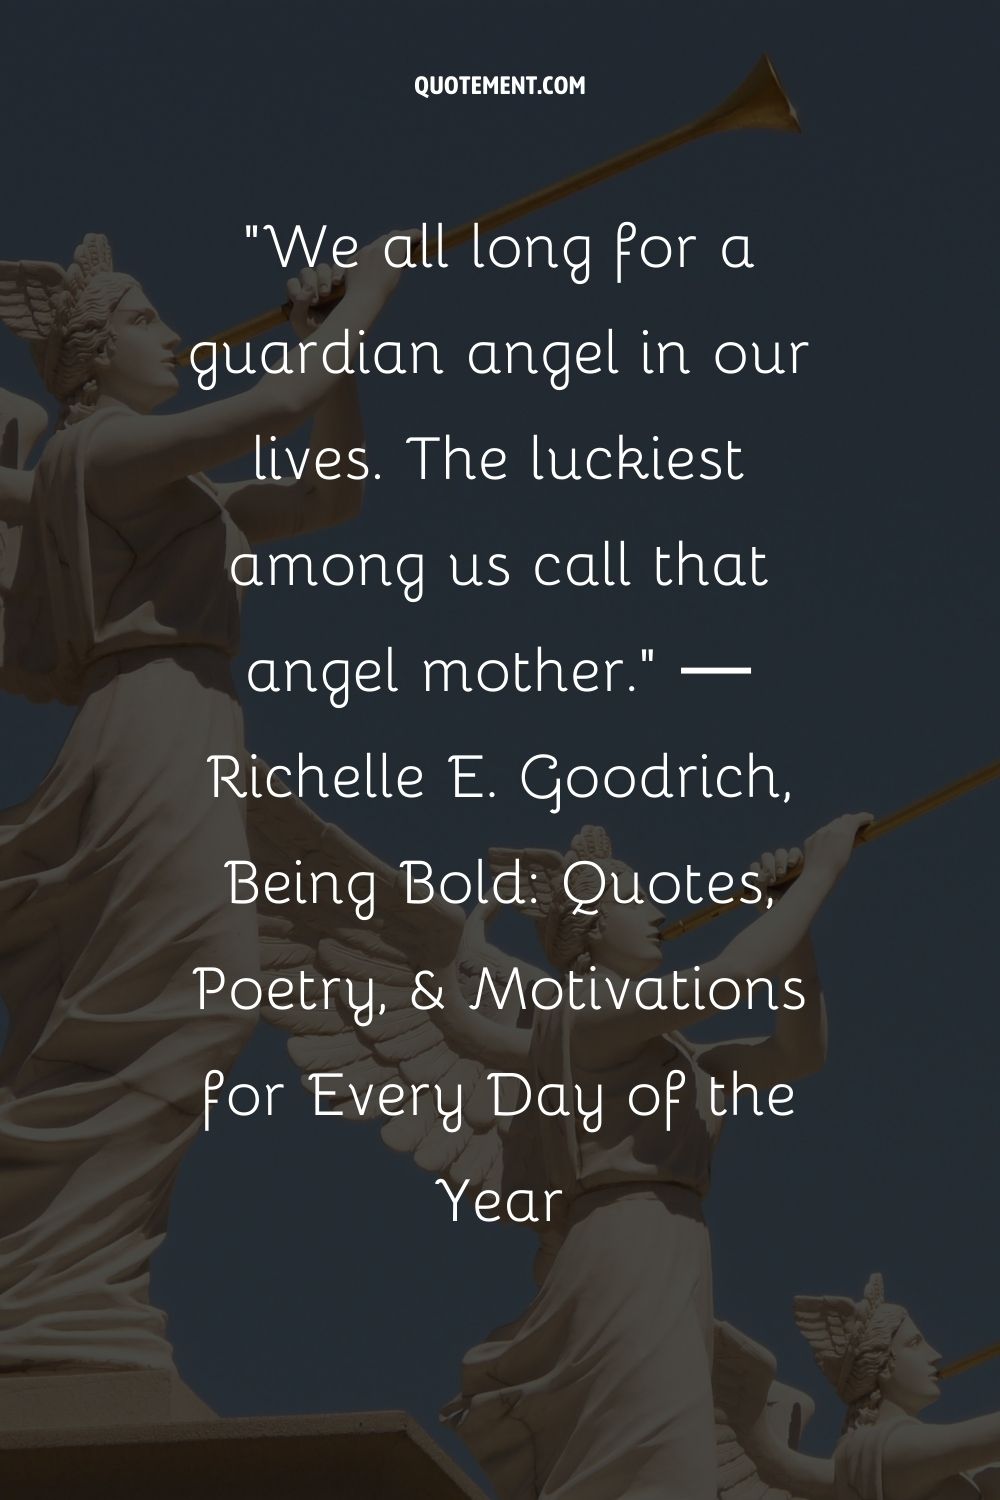 We all long for a guardian angel in our lives.